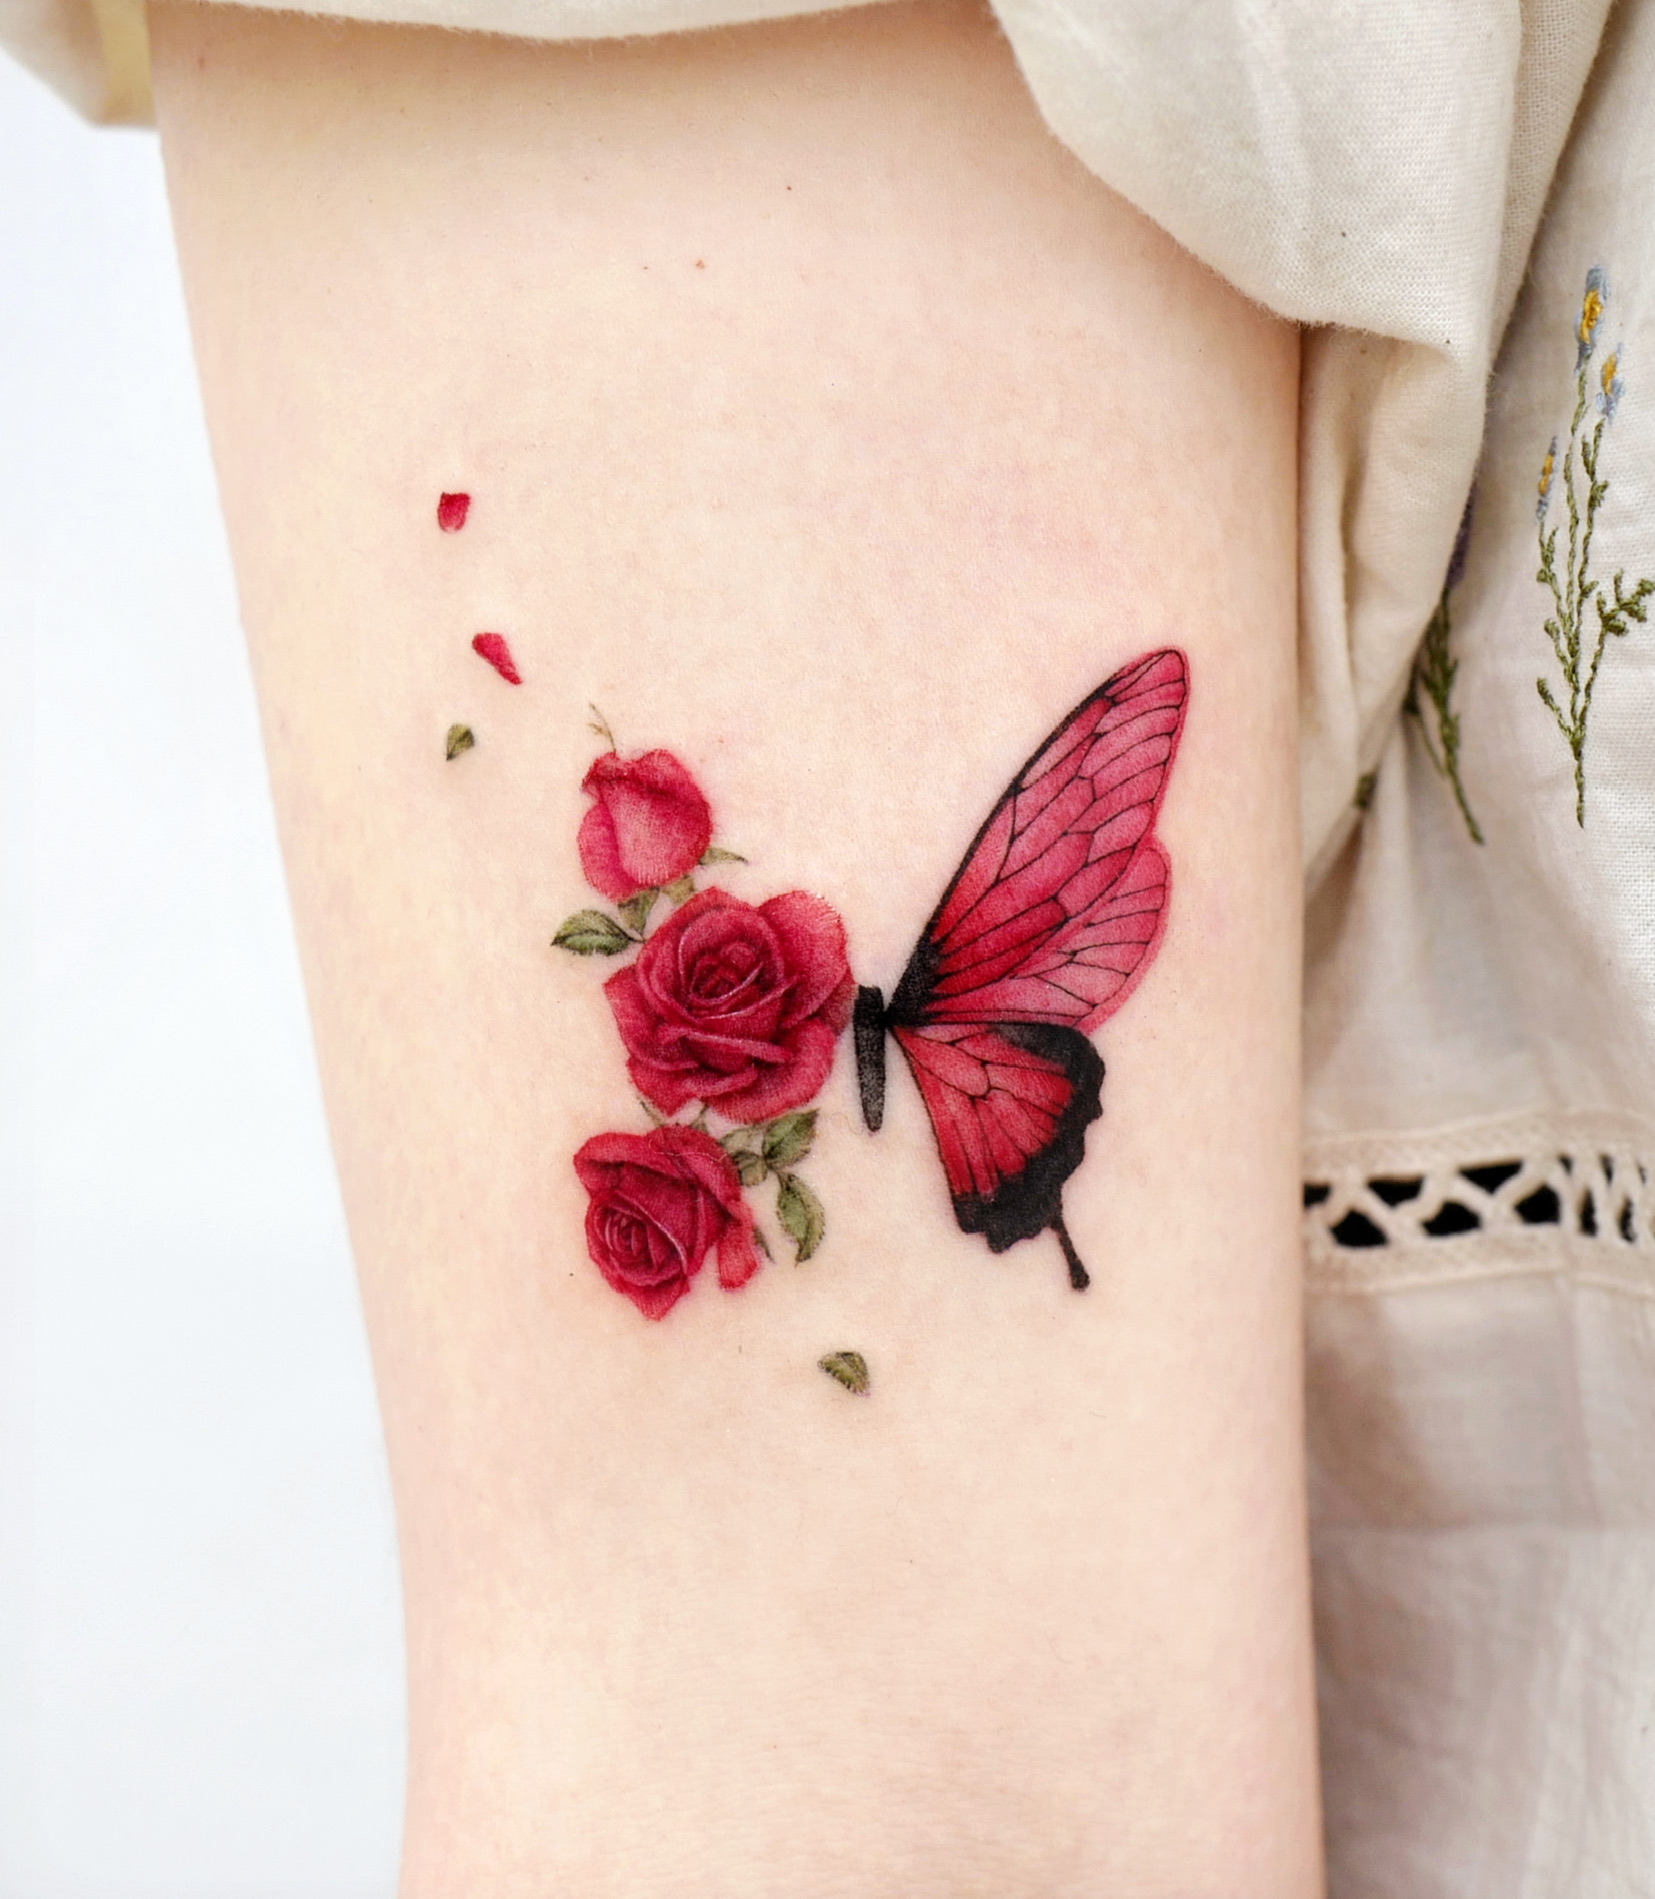 56 Inspiring Growth Tattoos with Meaning - Our Mindful Life | Garden tattoos,  Tattoos with meaning, Roots tattoo